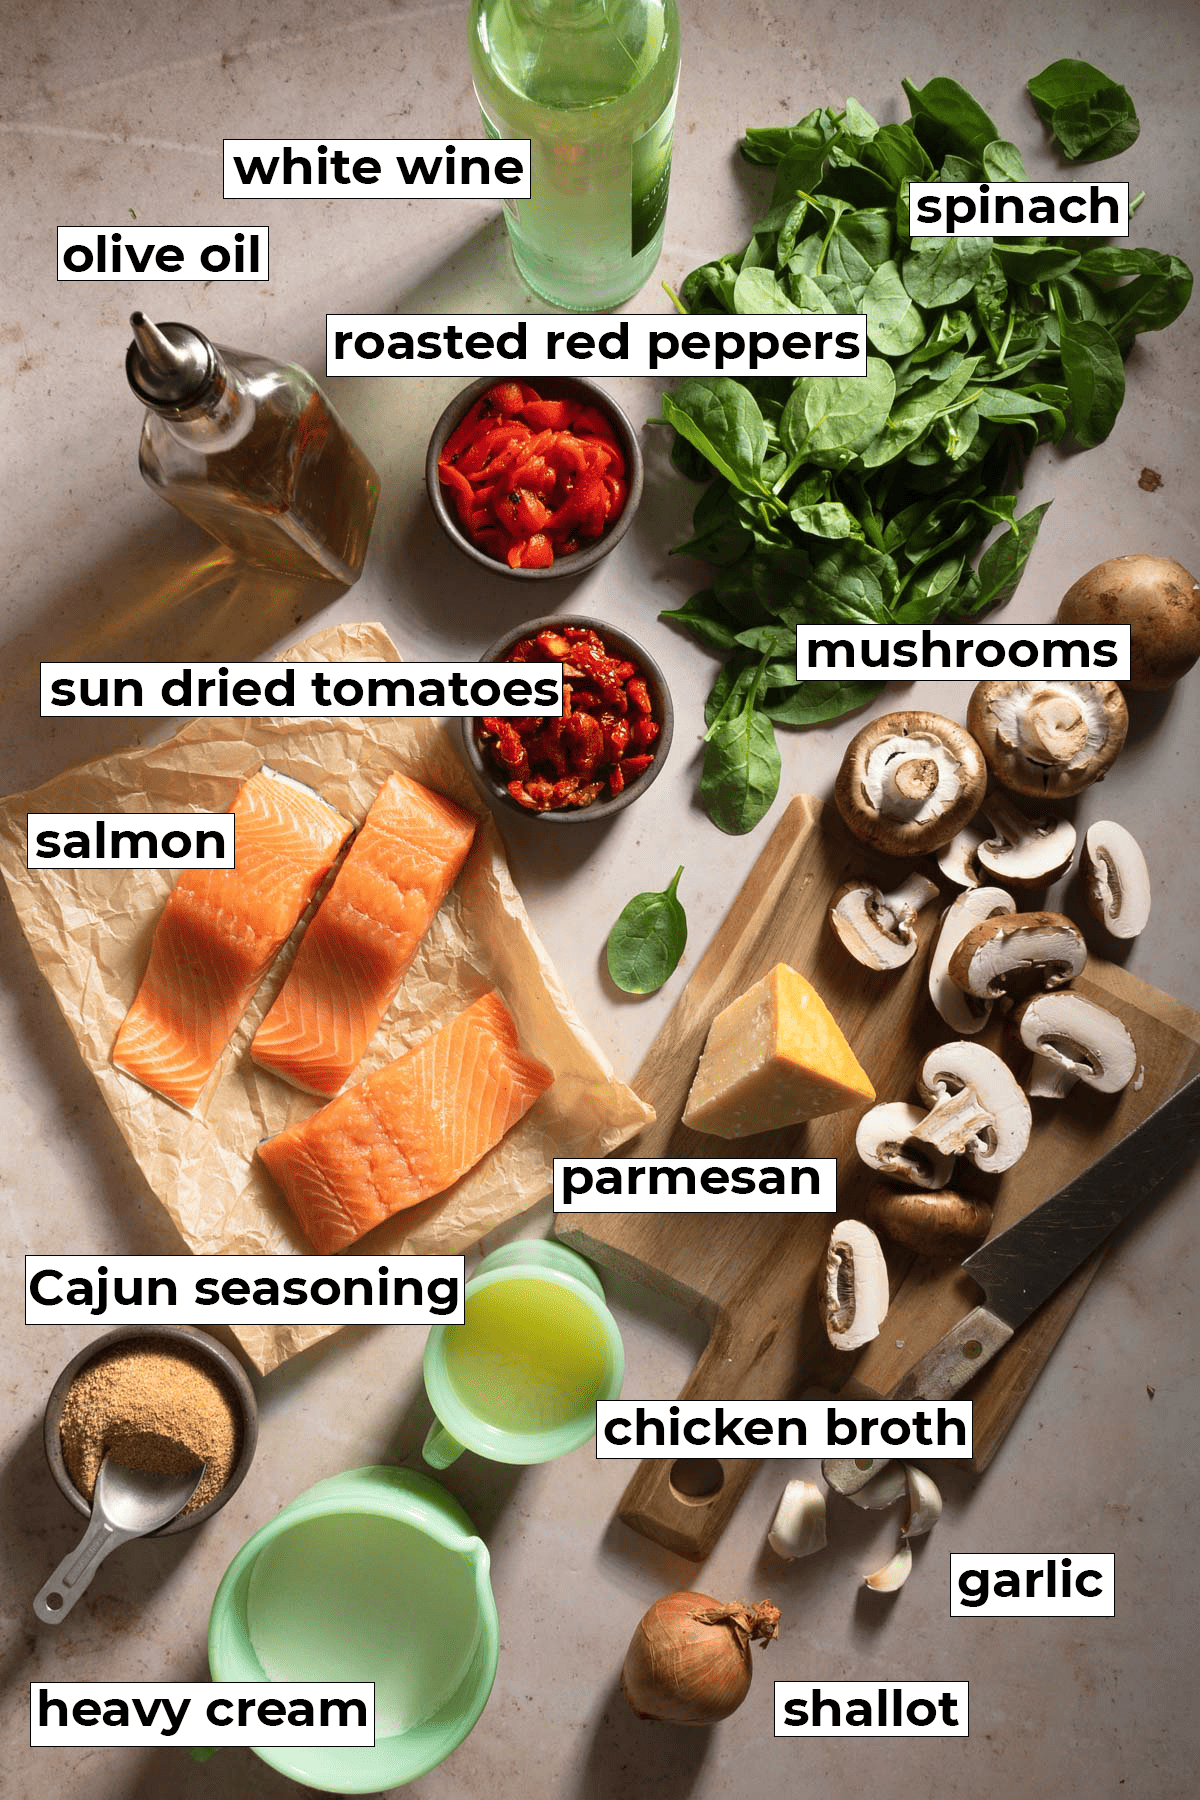 Ingredients for cajun salmon pasta including parmesan, mushrooms, spinach, roasted red peppers, and sun dried tomatoes.